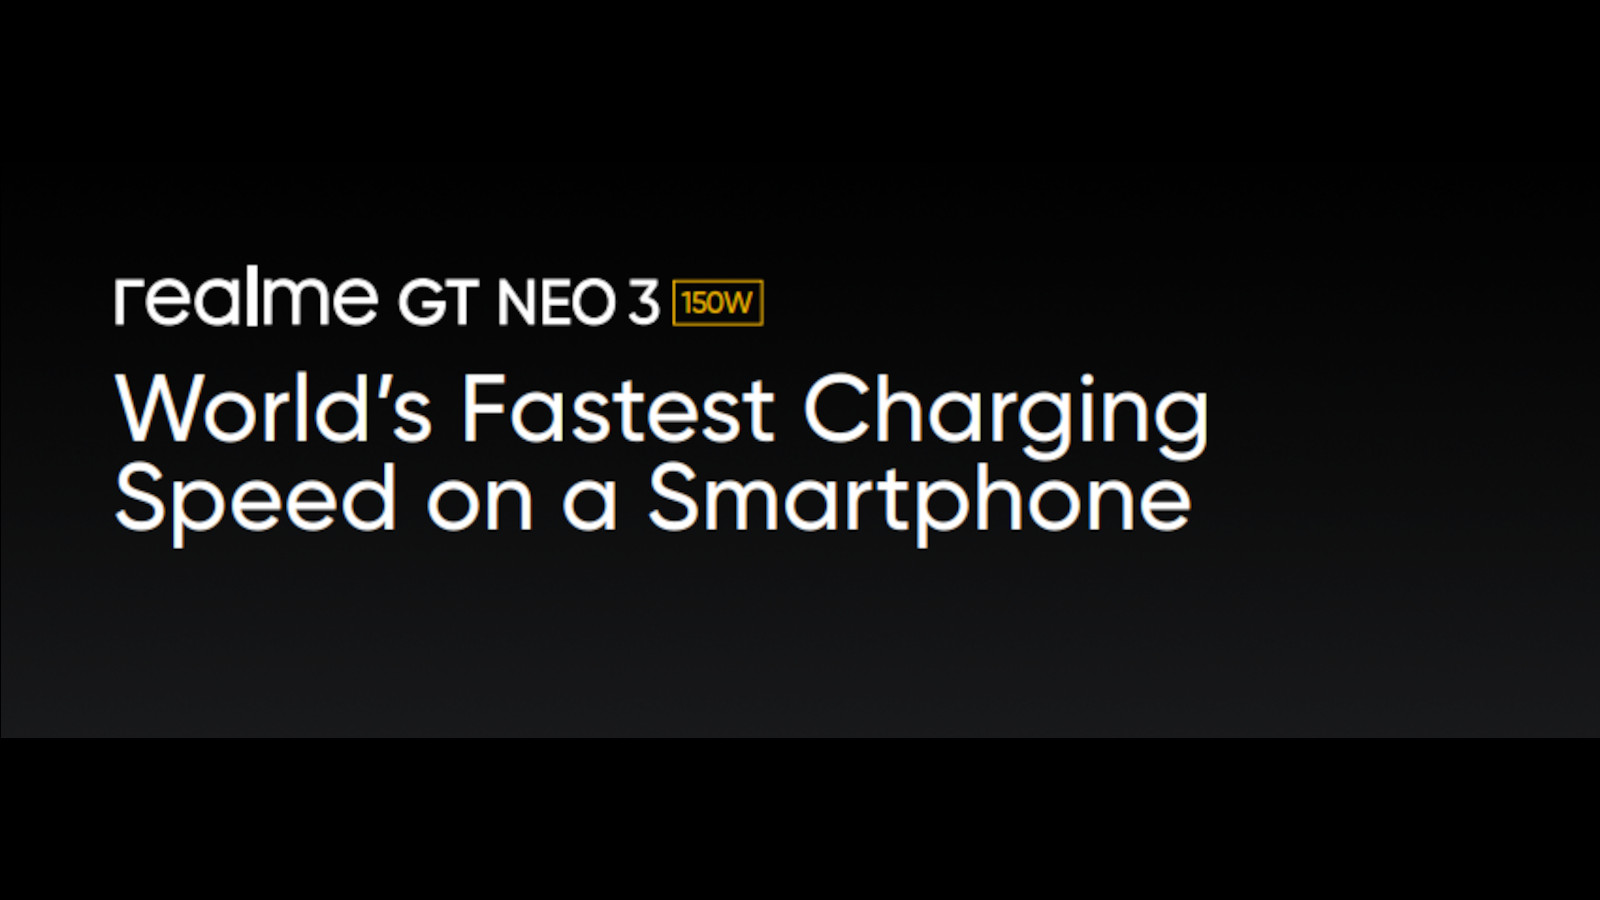 A graphic announcing Realme's 150W charging feature for the GT NEO 3